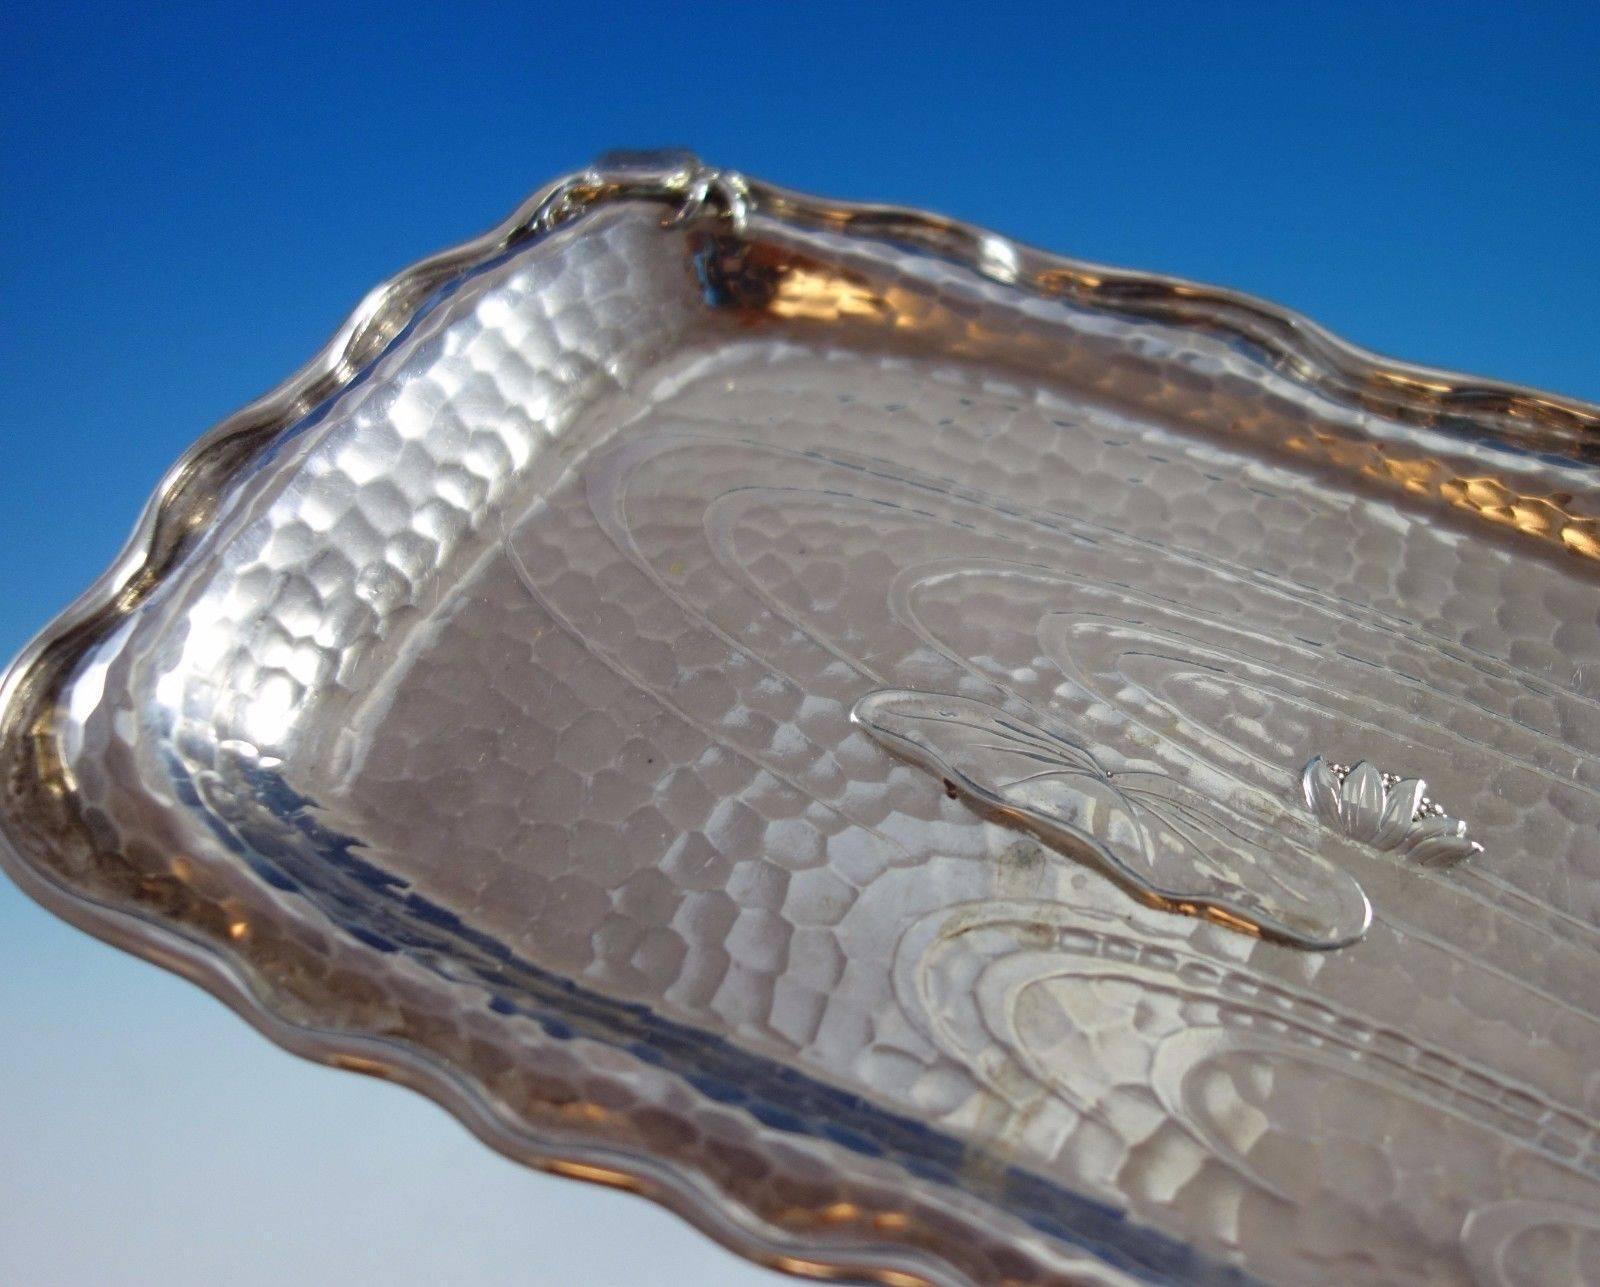 Lap Over Edge by Tiffany & Co. sterling silver tray #1481. The piece is hand hammered and acid etched with rippled water. It has four applied ball feet. It features an applied 3-D crab, applied lily pads, and water lily. Vintage monogram and